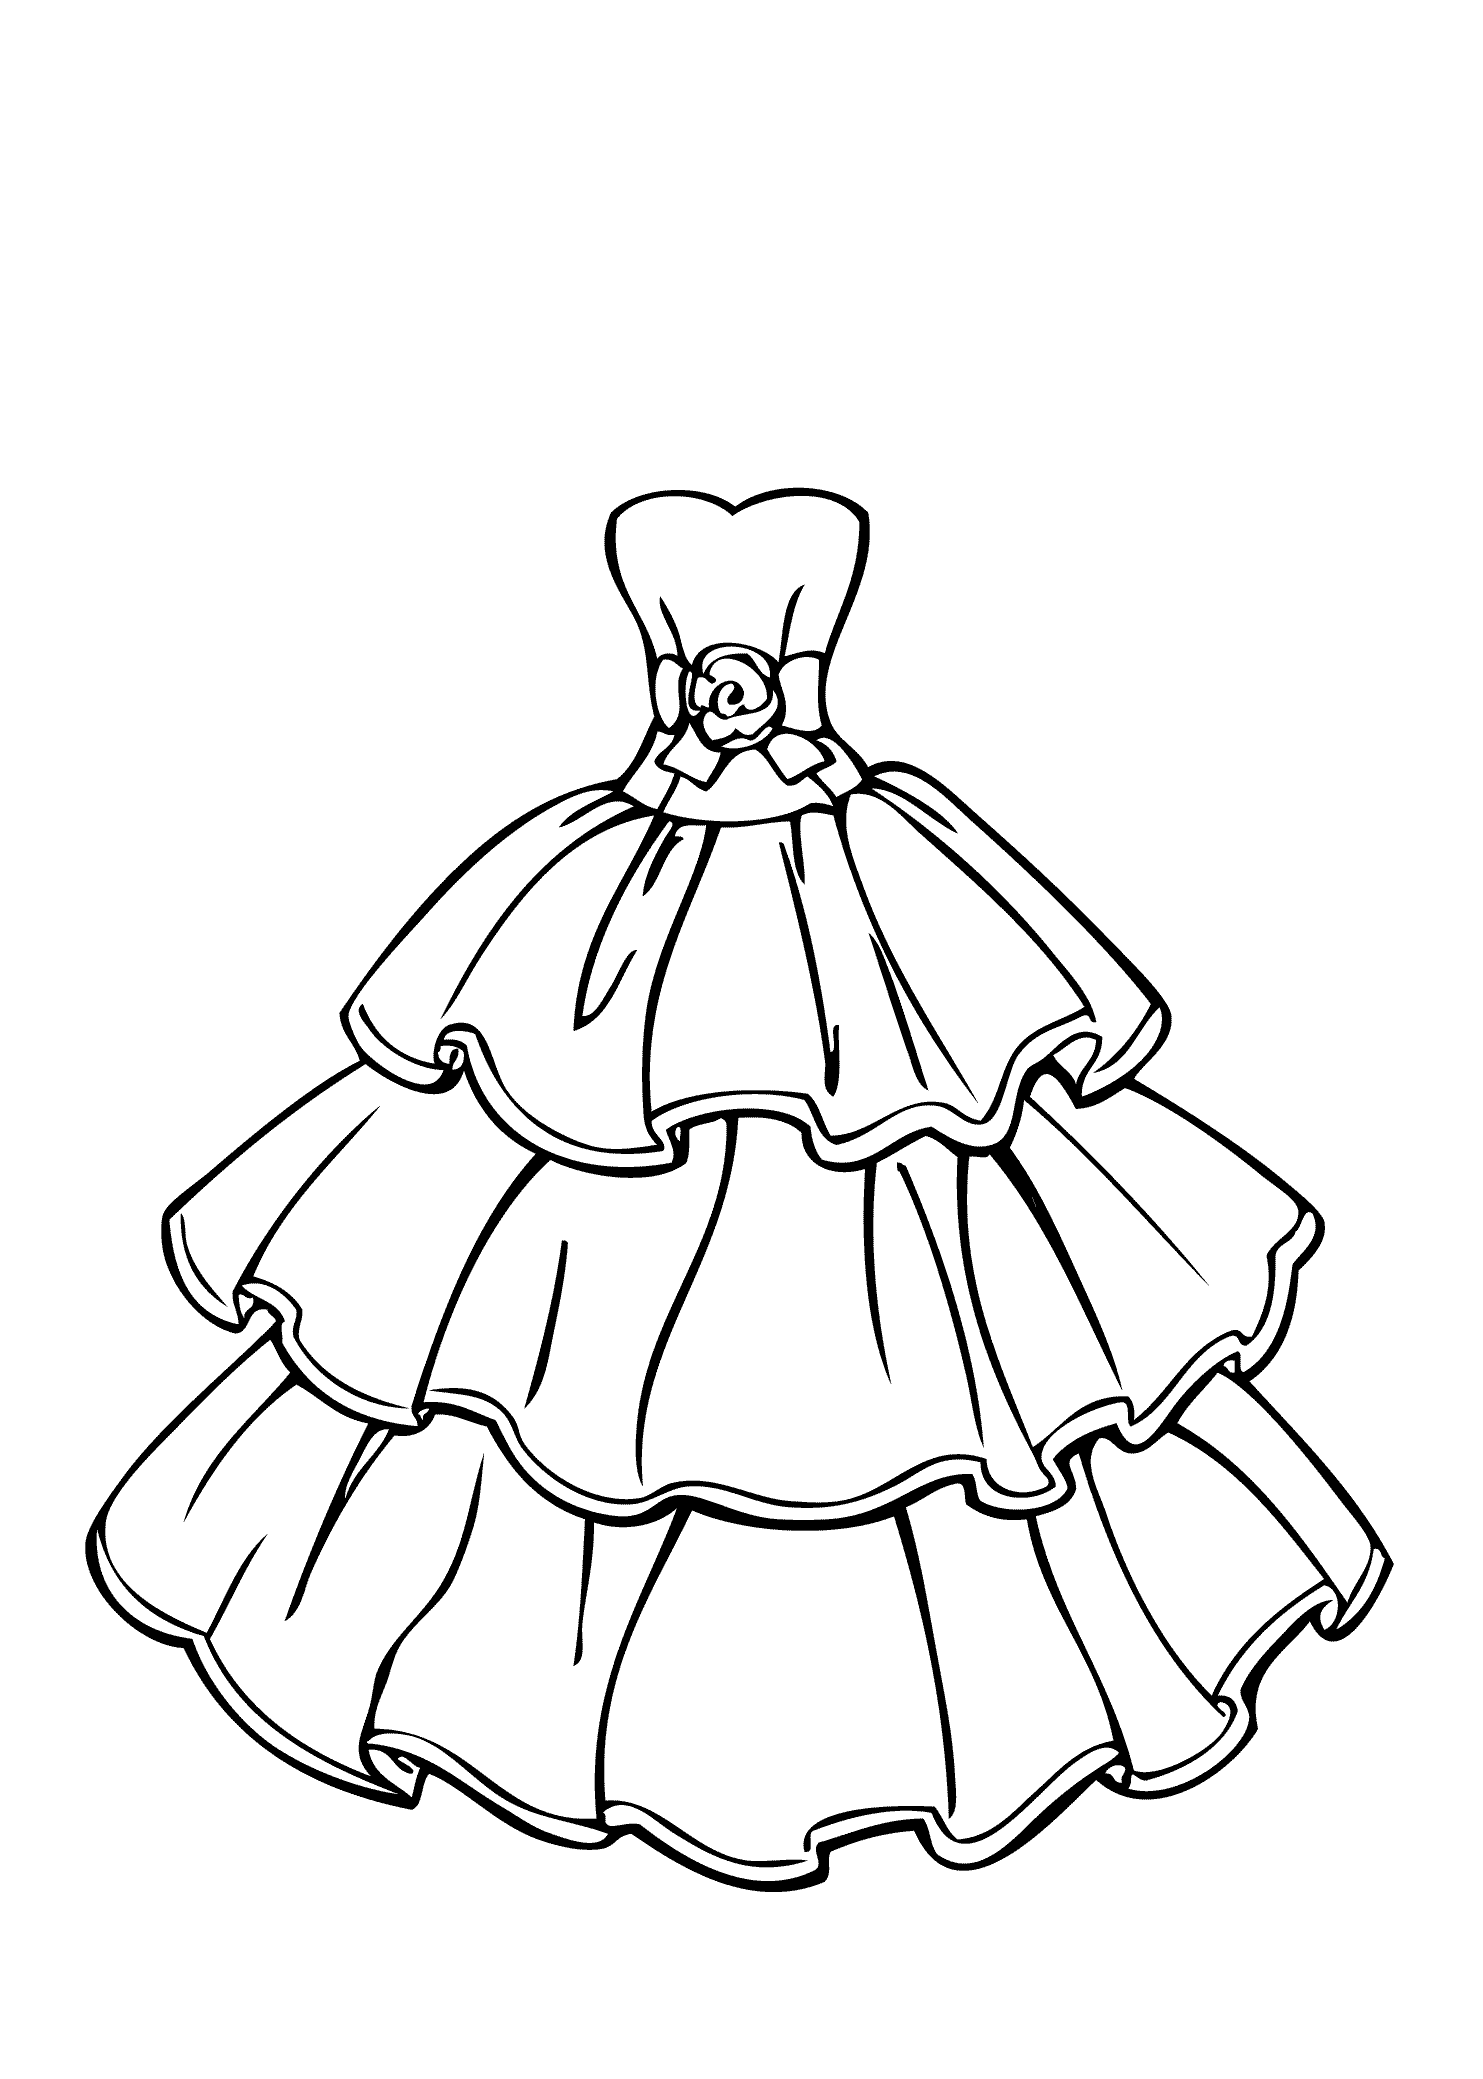 Printable Wedding Dress - Coloring Pages for Kids and for Adults